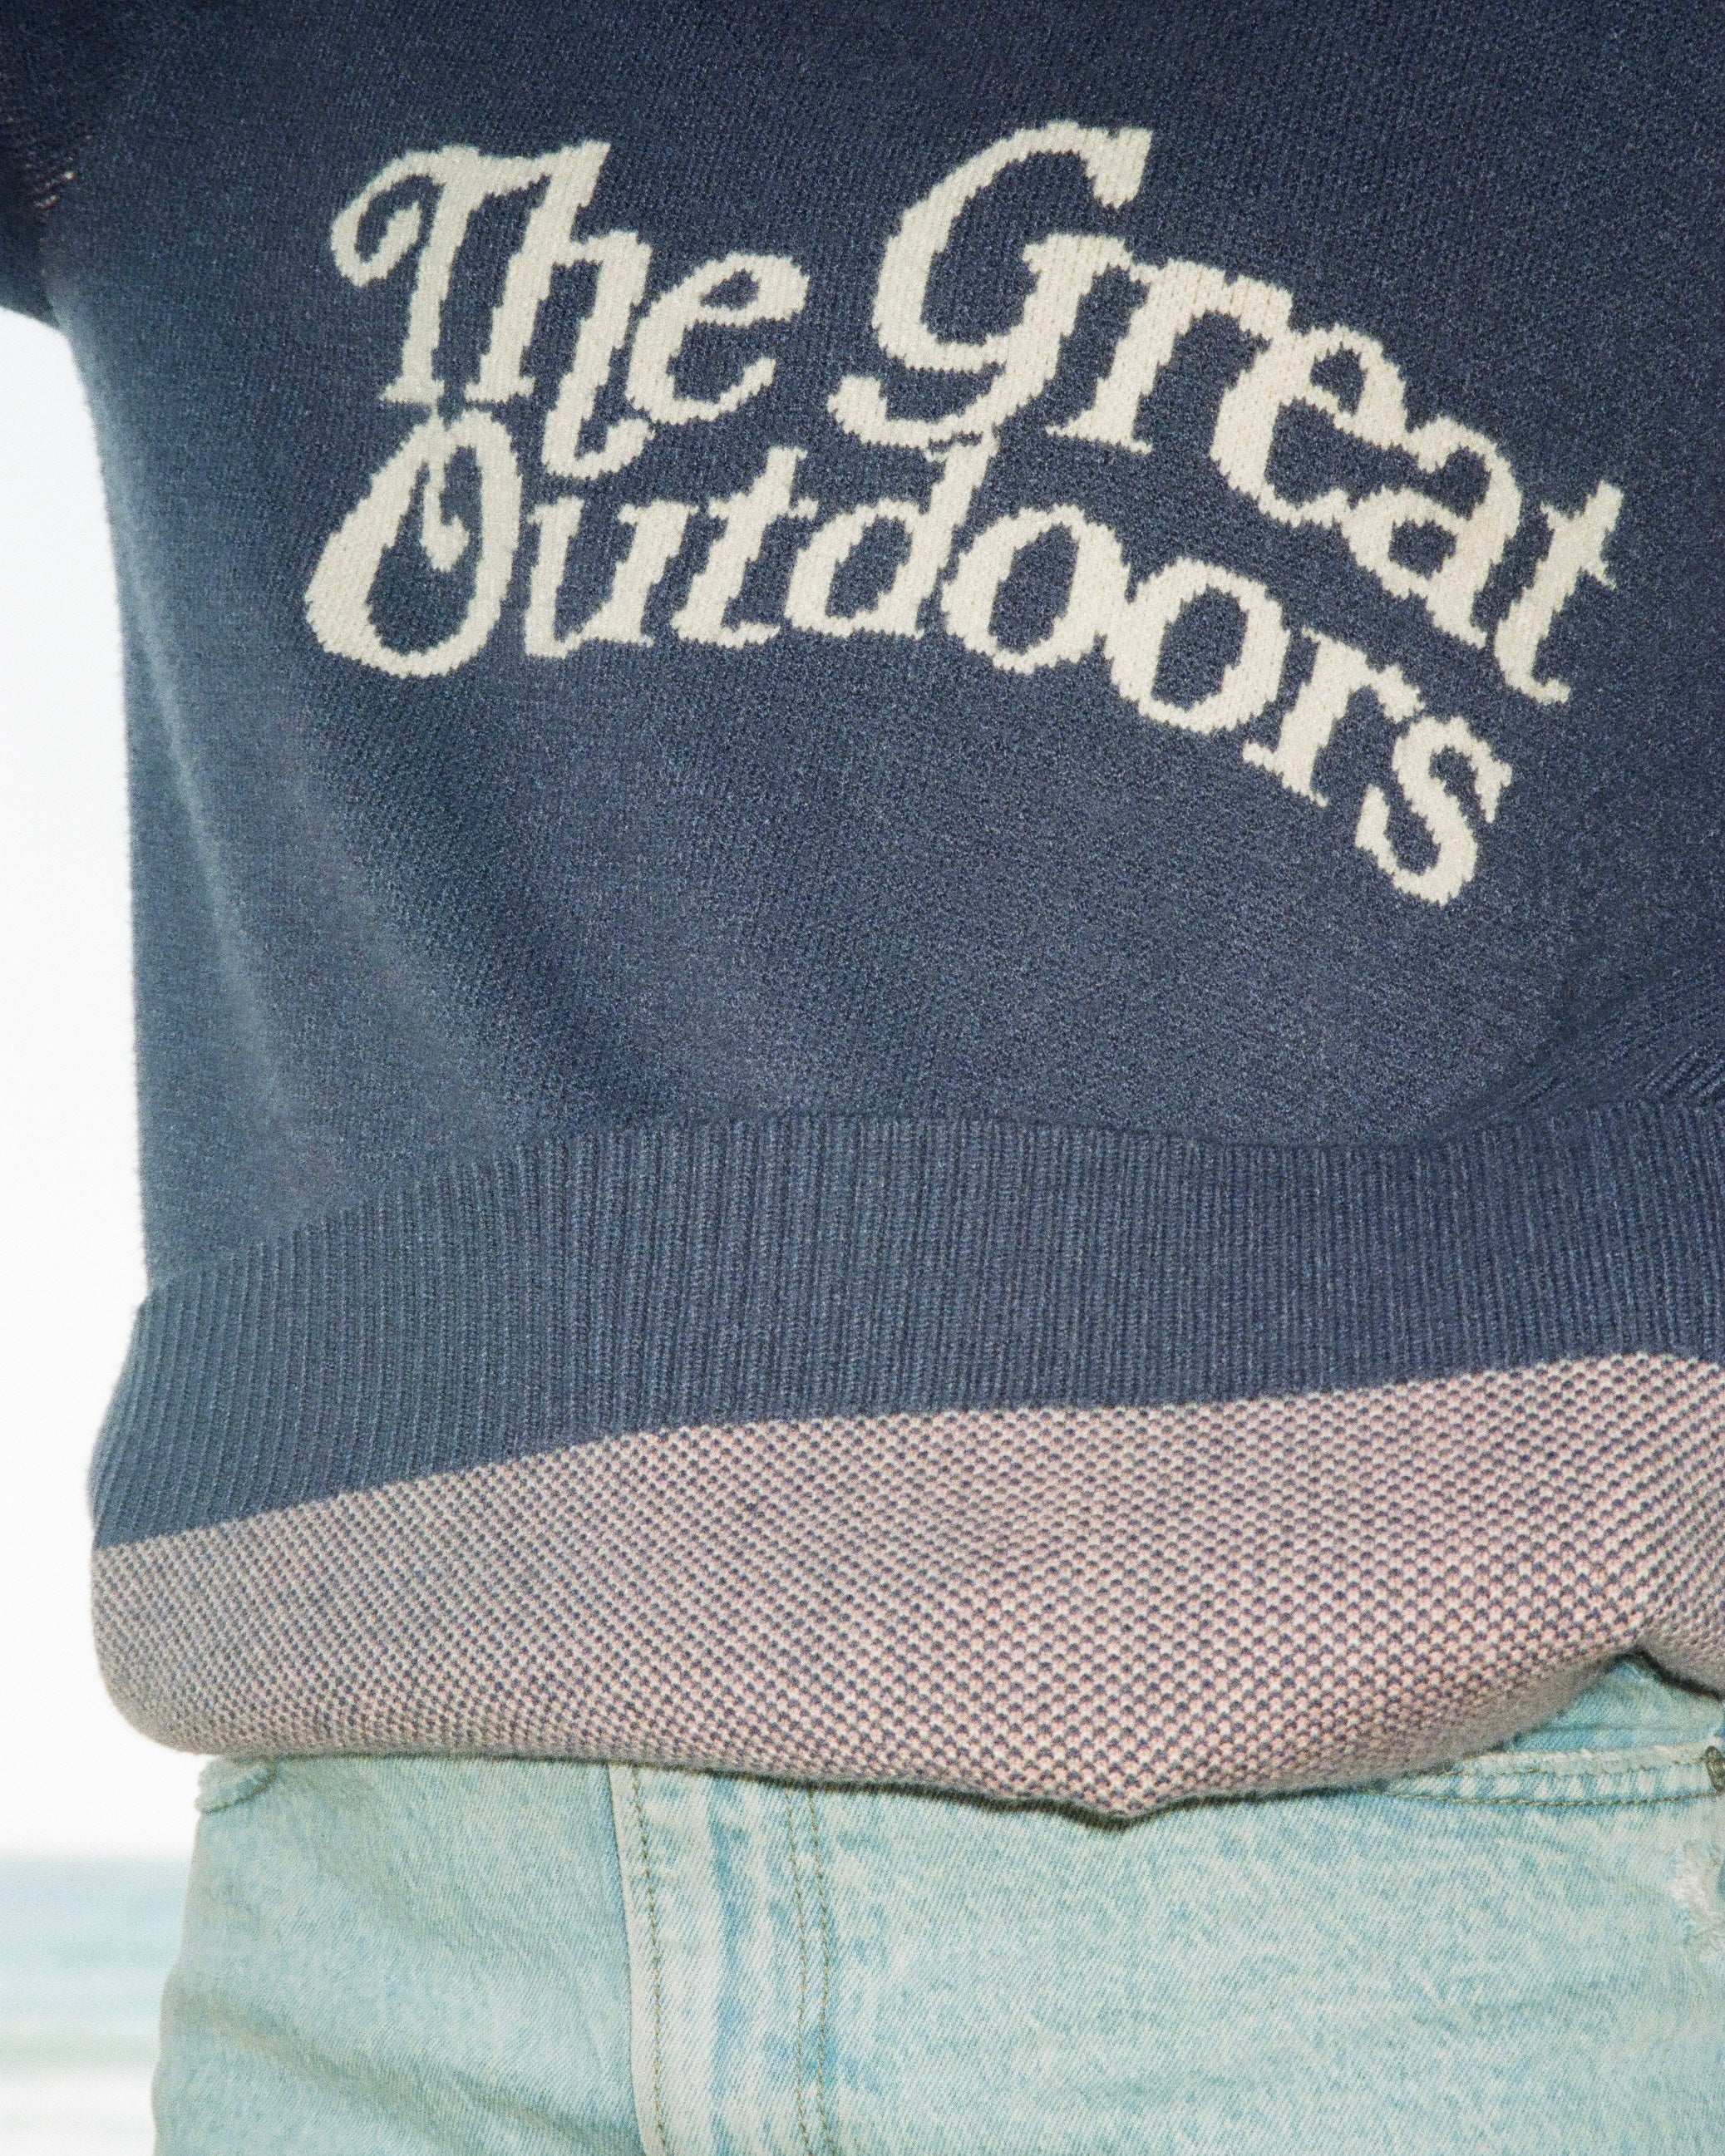 "The Great Outdoors" Knit Sweater in Blue